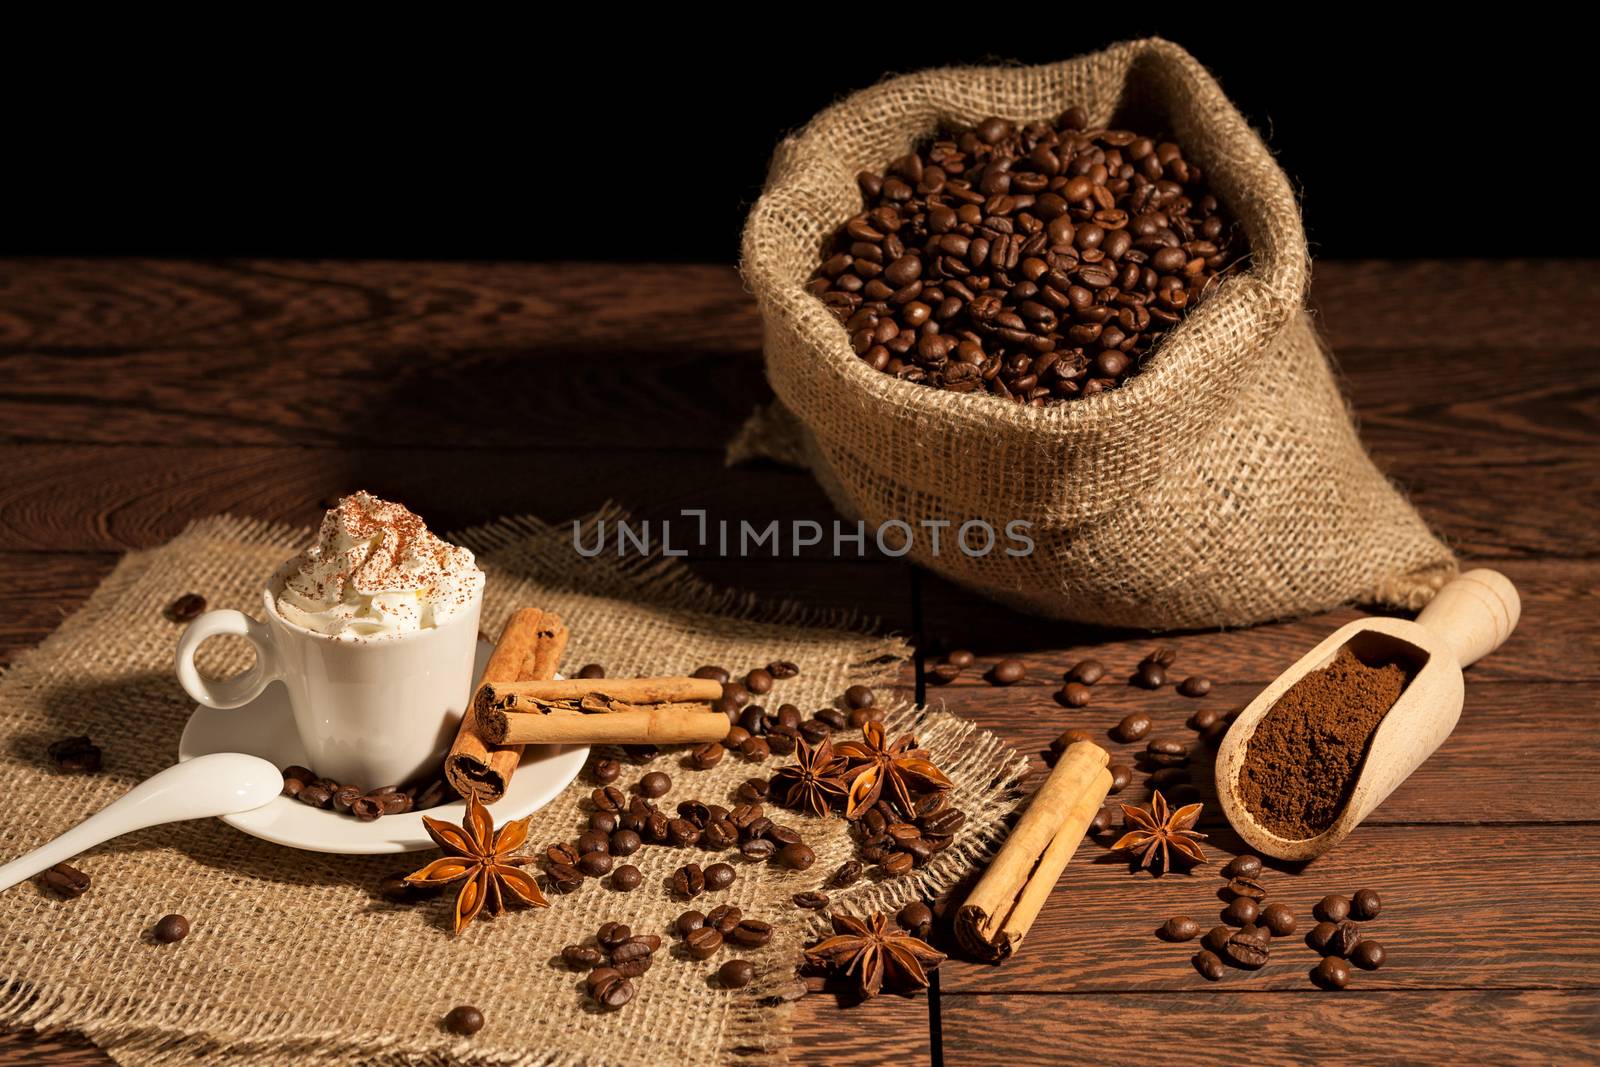 Coffee with whipped cream, cocoa powder, cinnamon and star anise